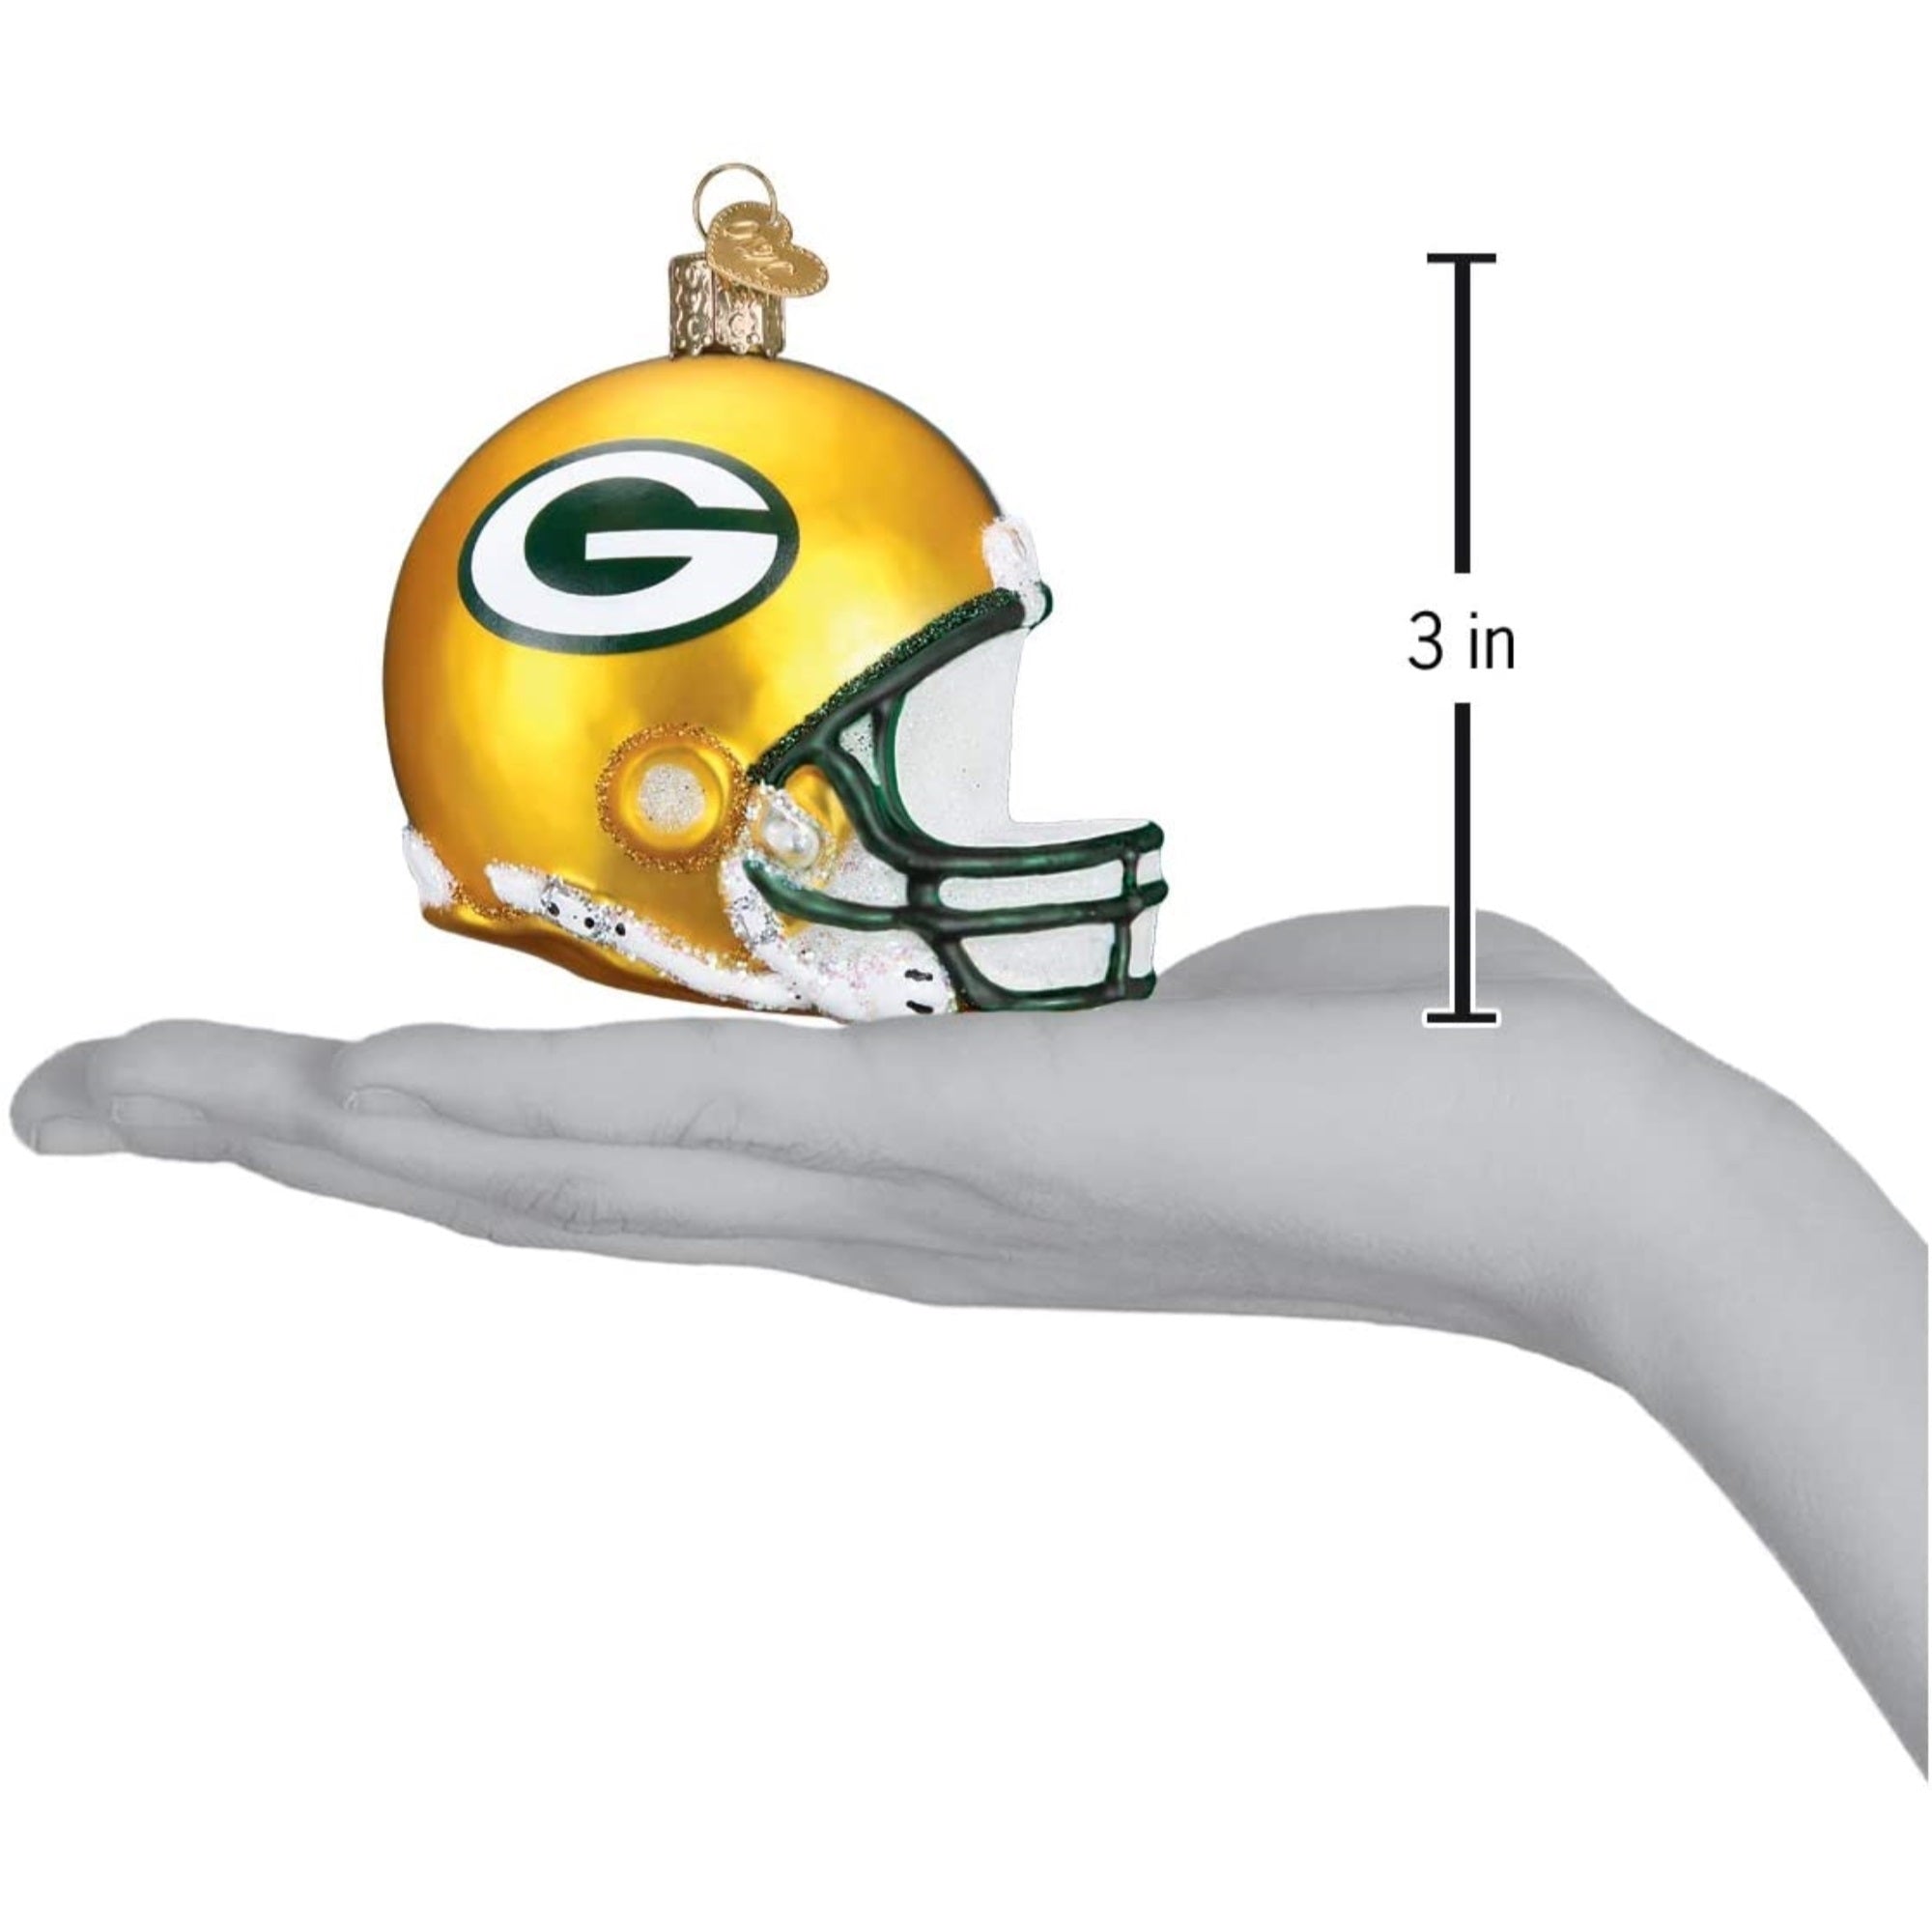 Old World Christmas Green Bay Packers Helmet Ornament For Christmas Tree